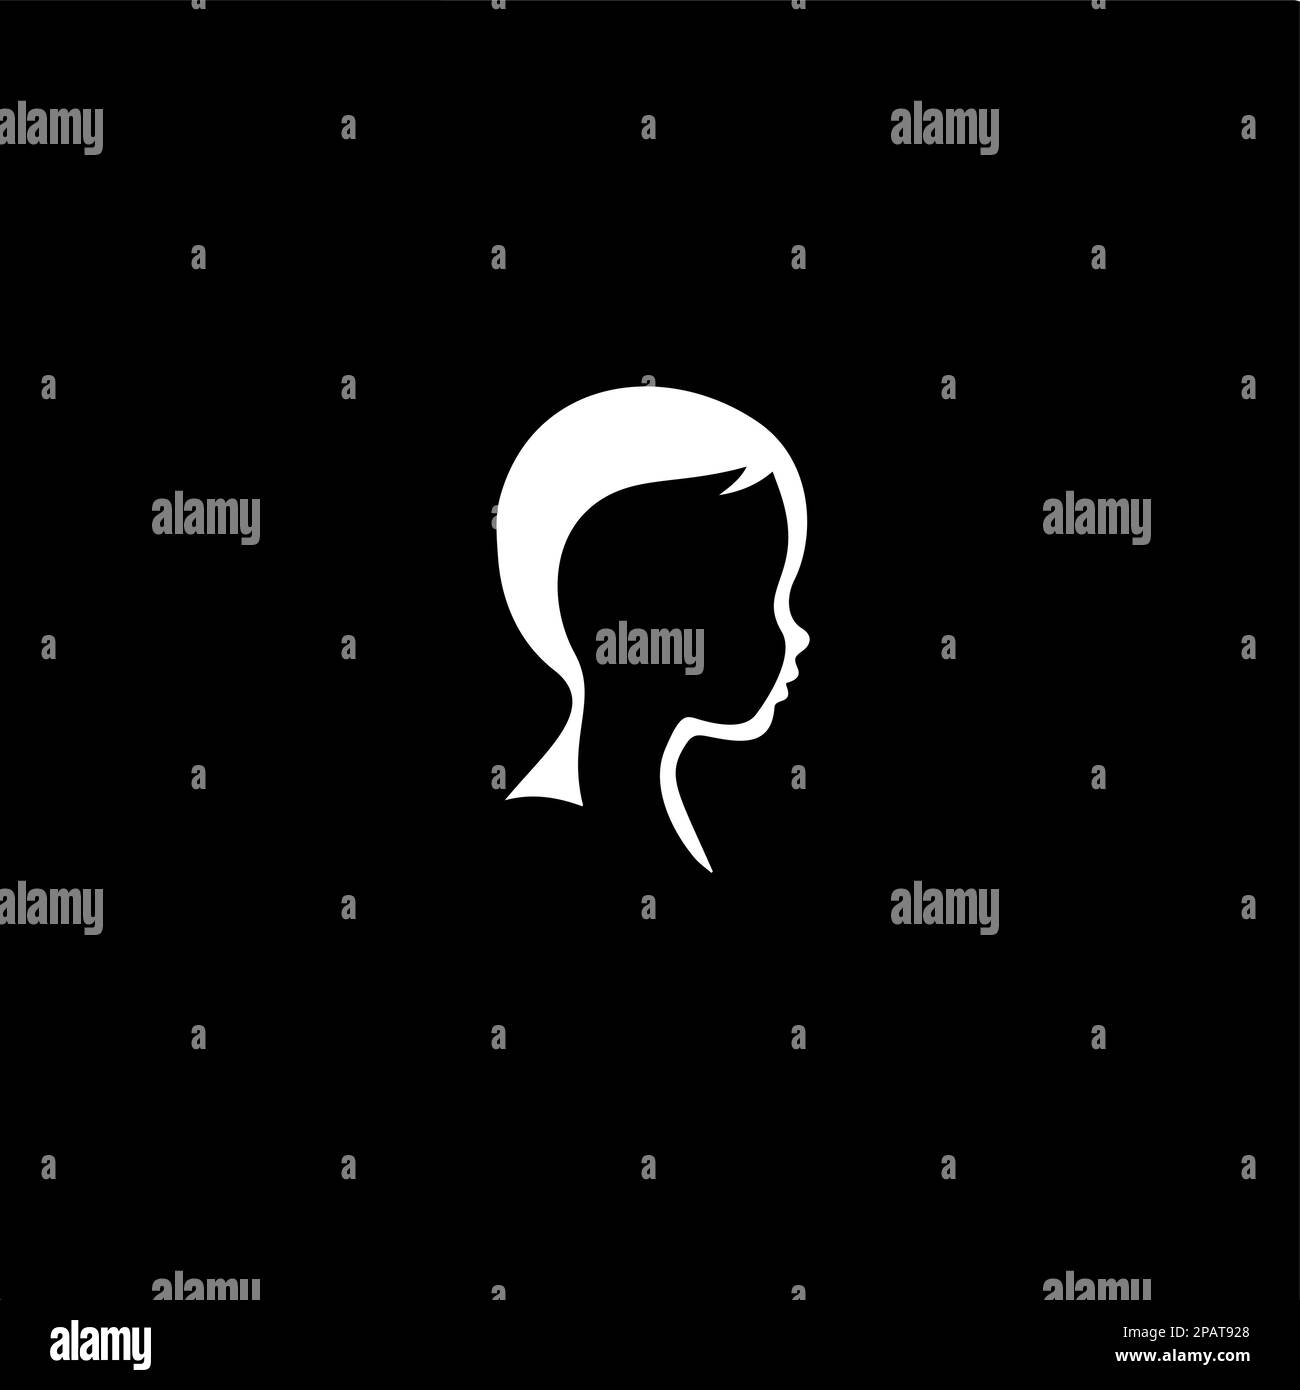 Minimalistic logo template, white icon of boy portrait silhouette on black background, modern logotype concept for business identity, t-shirts print Stock Vector